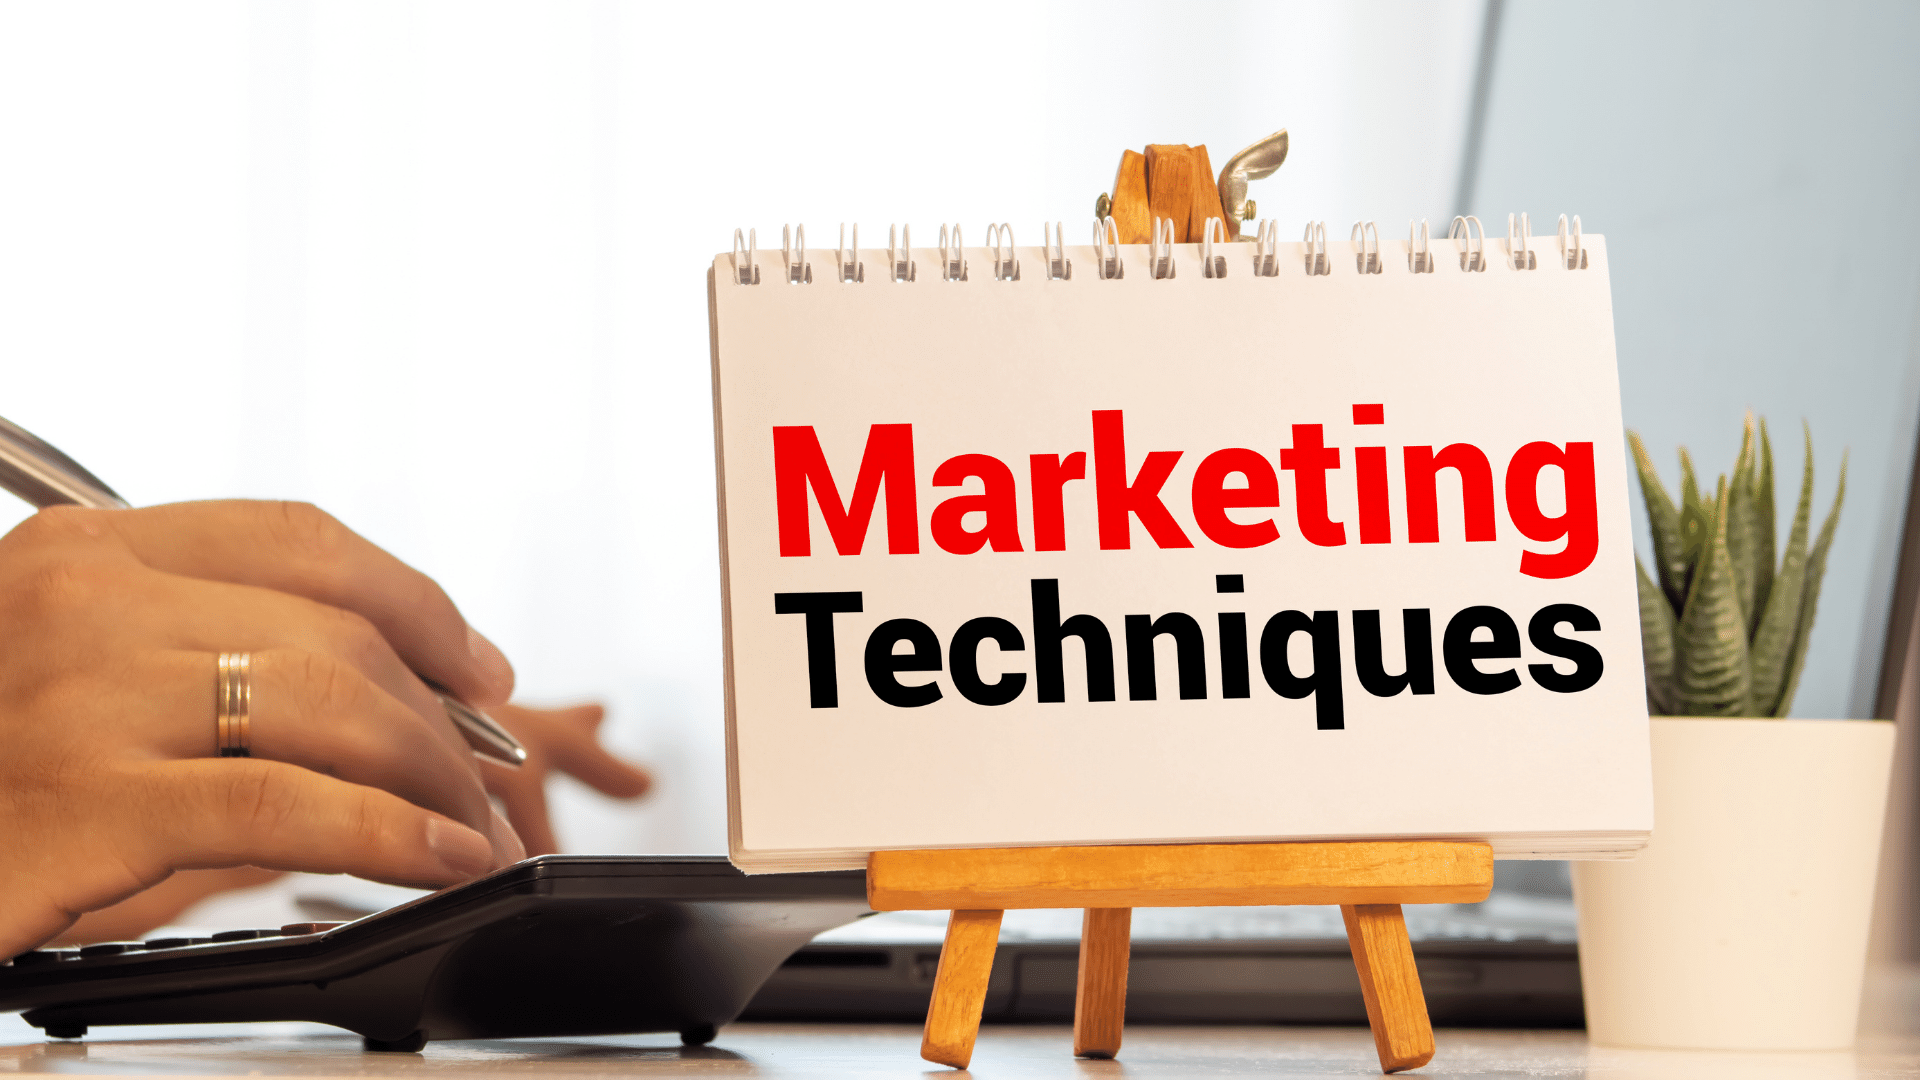 Marketing Techniques for 2022